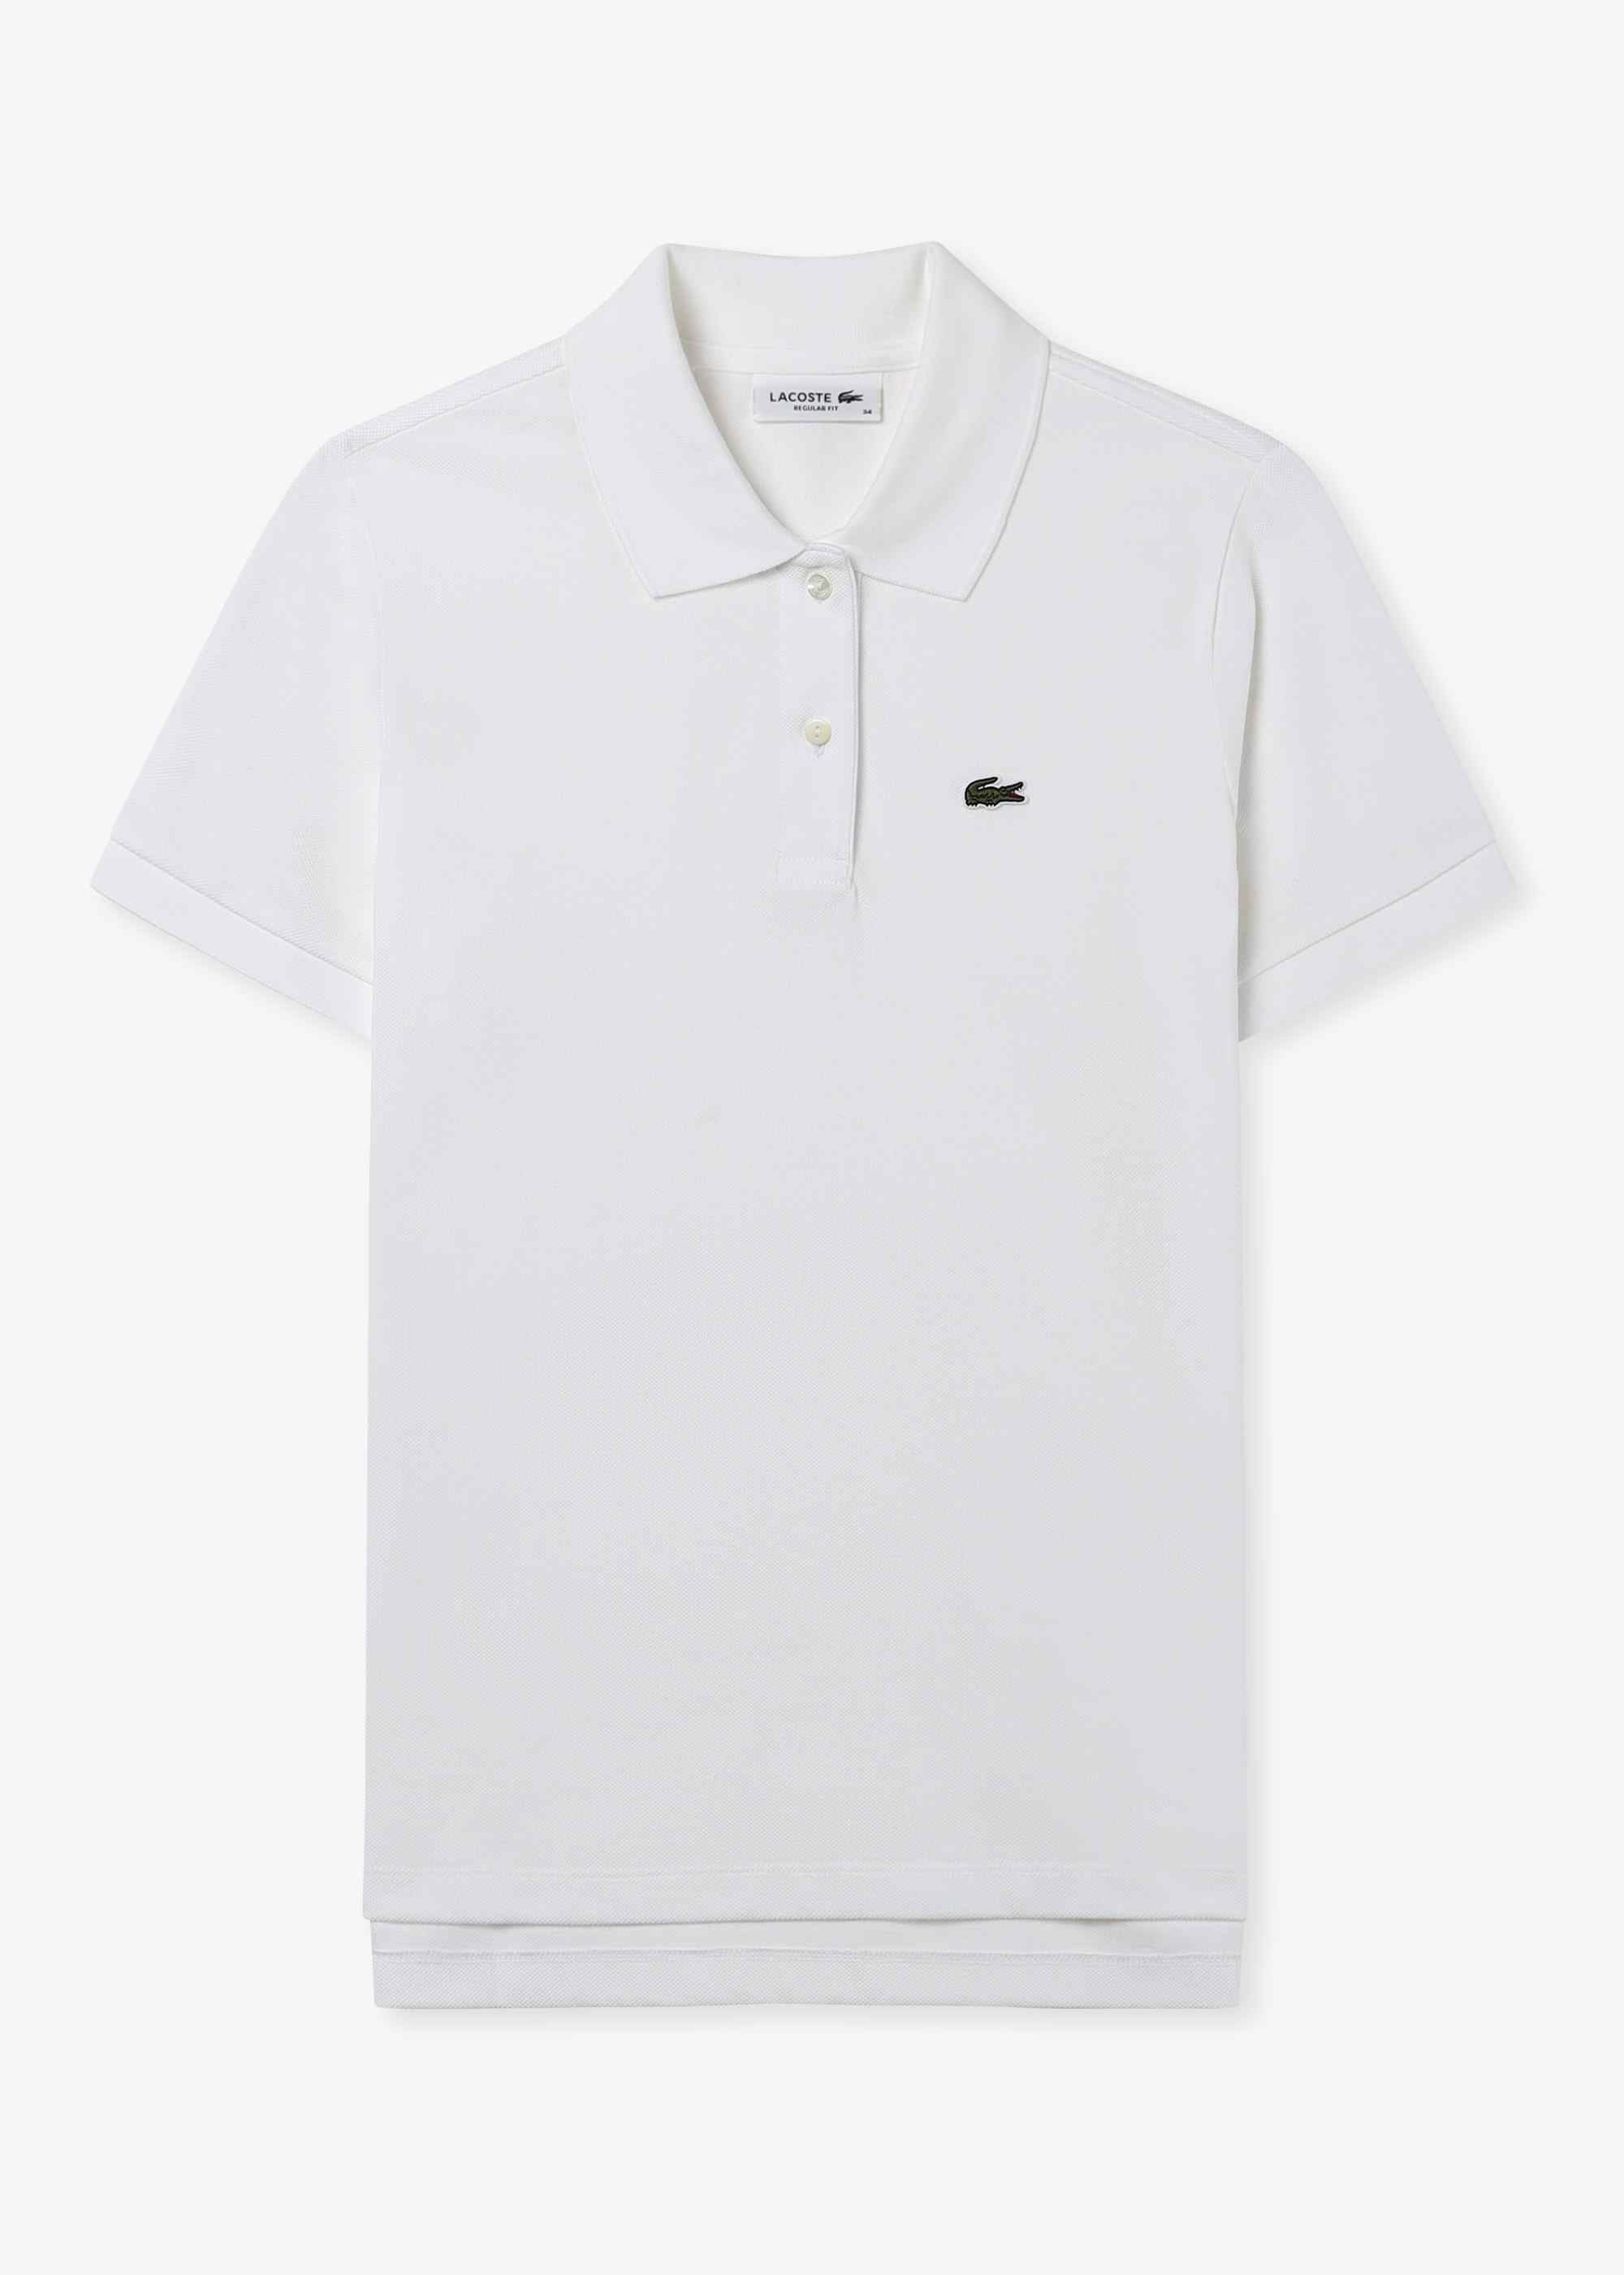 Lacoste Womens Classic Pique Polo Shirt In White - White